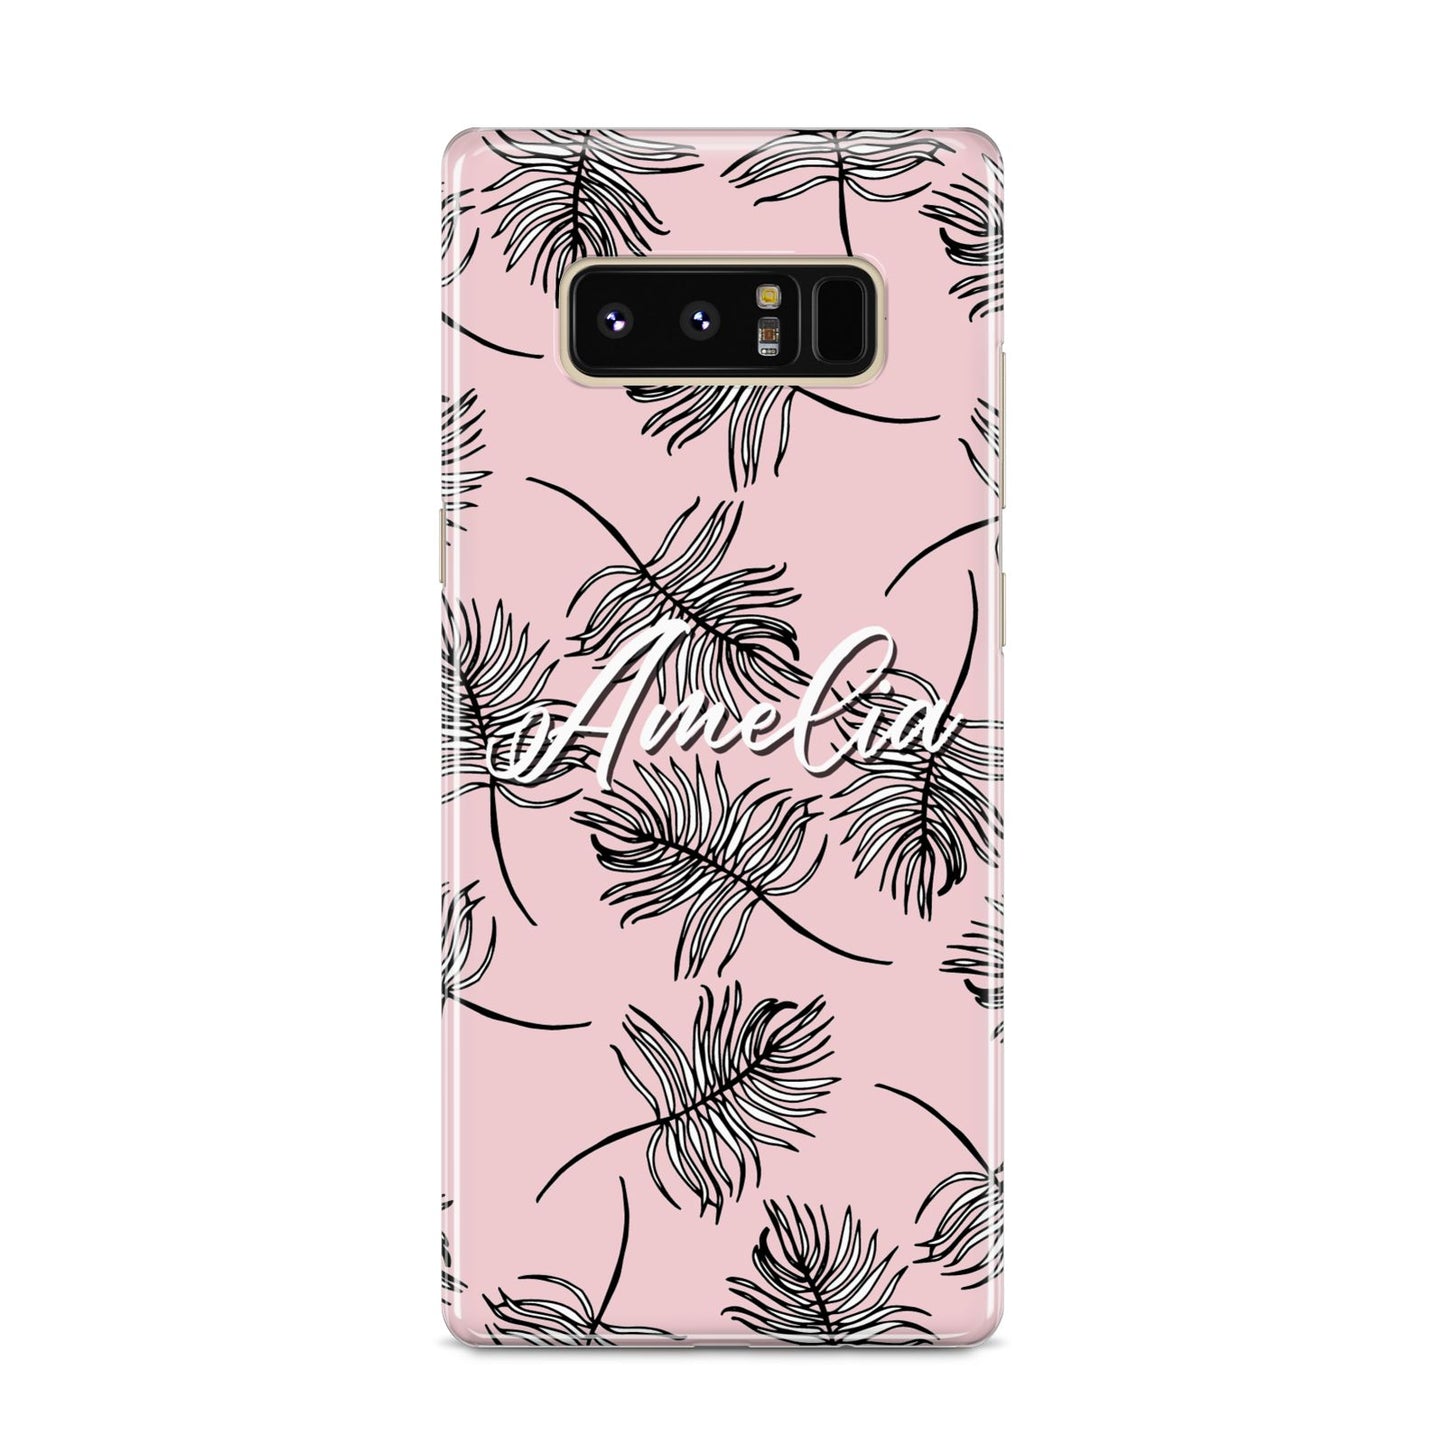 Personalised Pink Monochrome Tropical Leaf Samsung Galaxy S8 Case